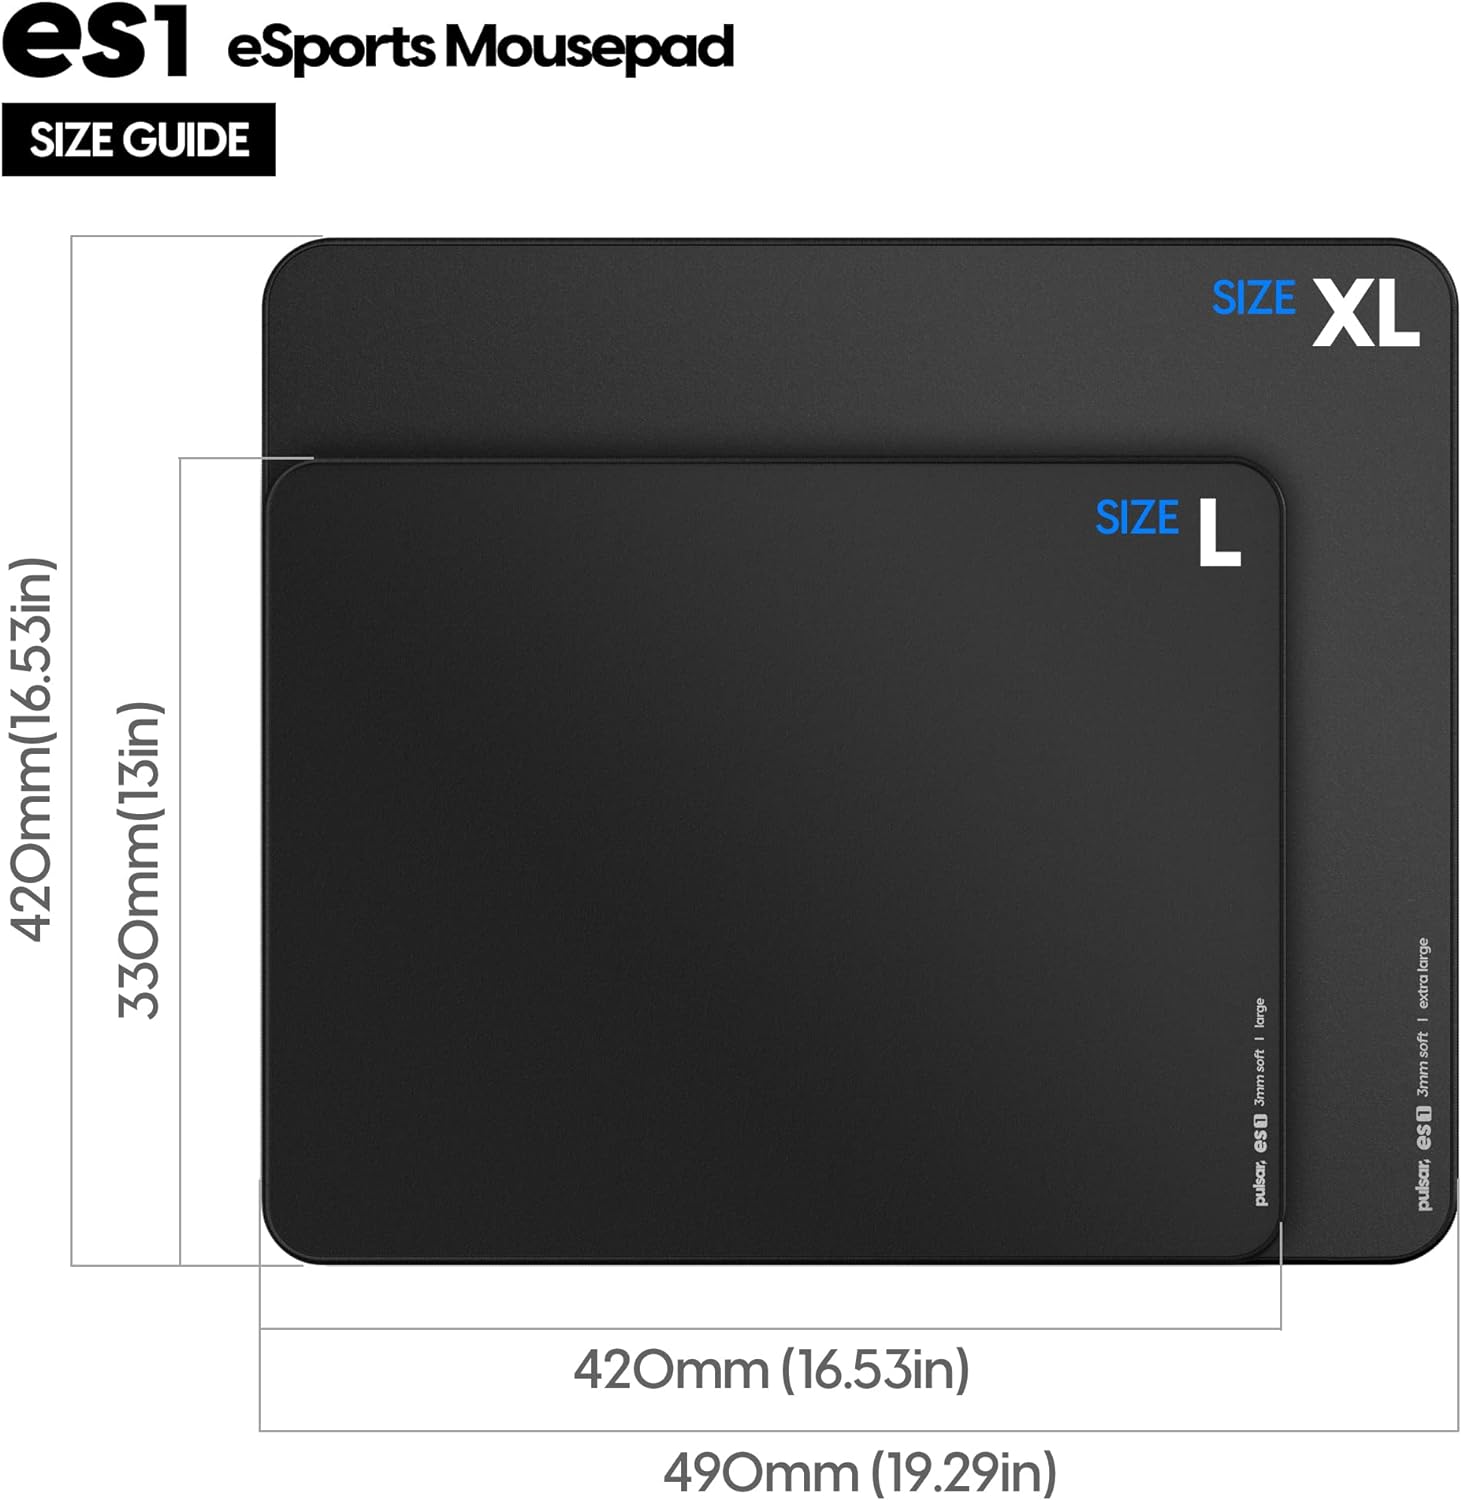 A large marketing image providing additional information about the product Pulsar ES1 Mousepad 3mm XL - Black - Additional alt info not provided